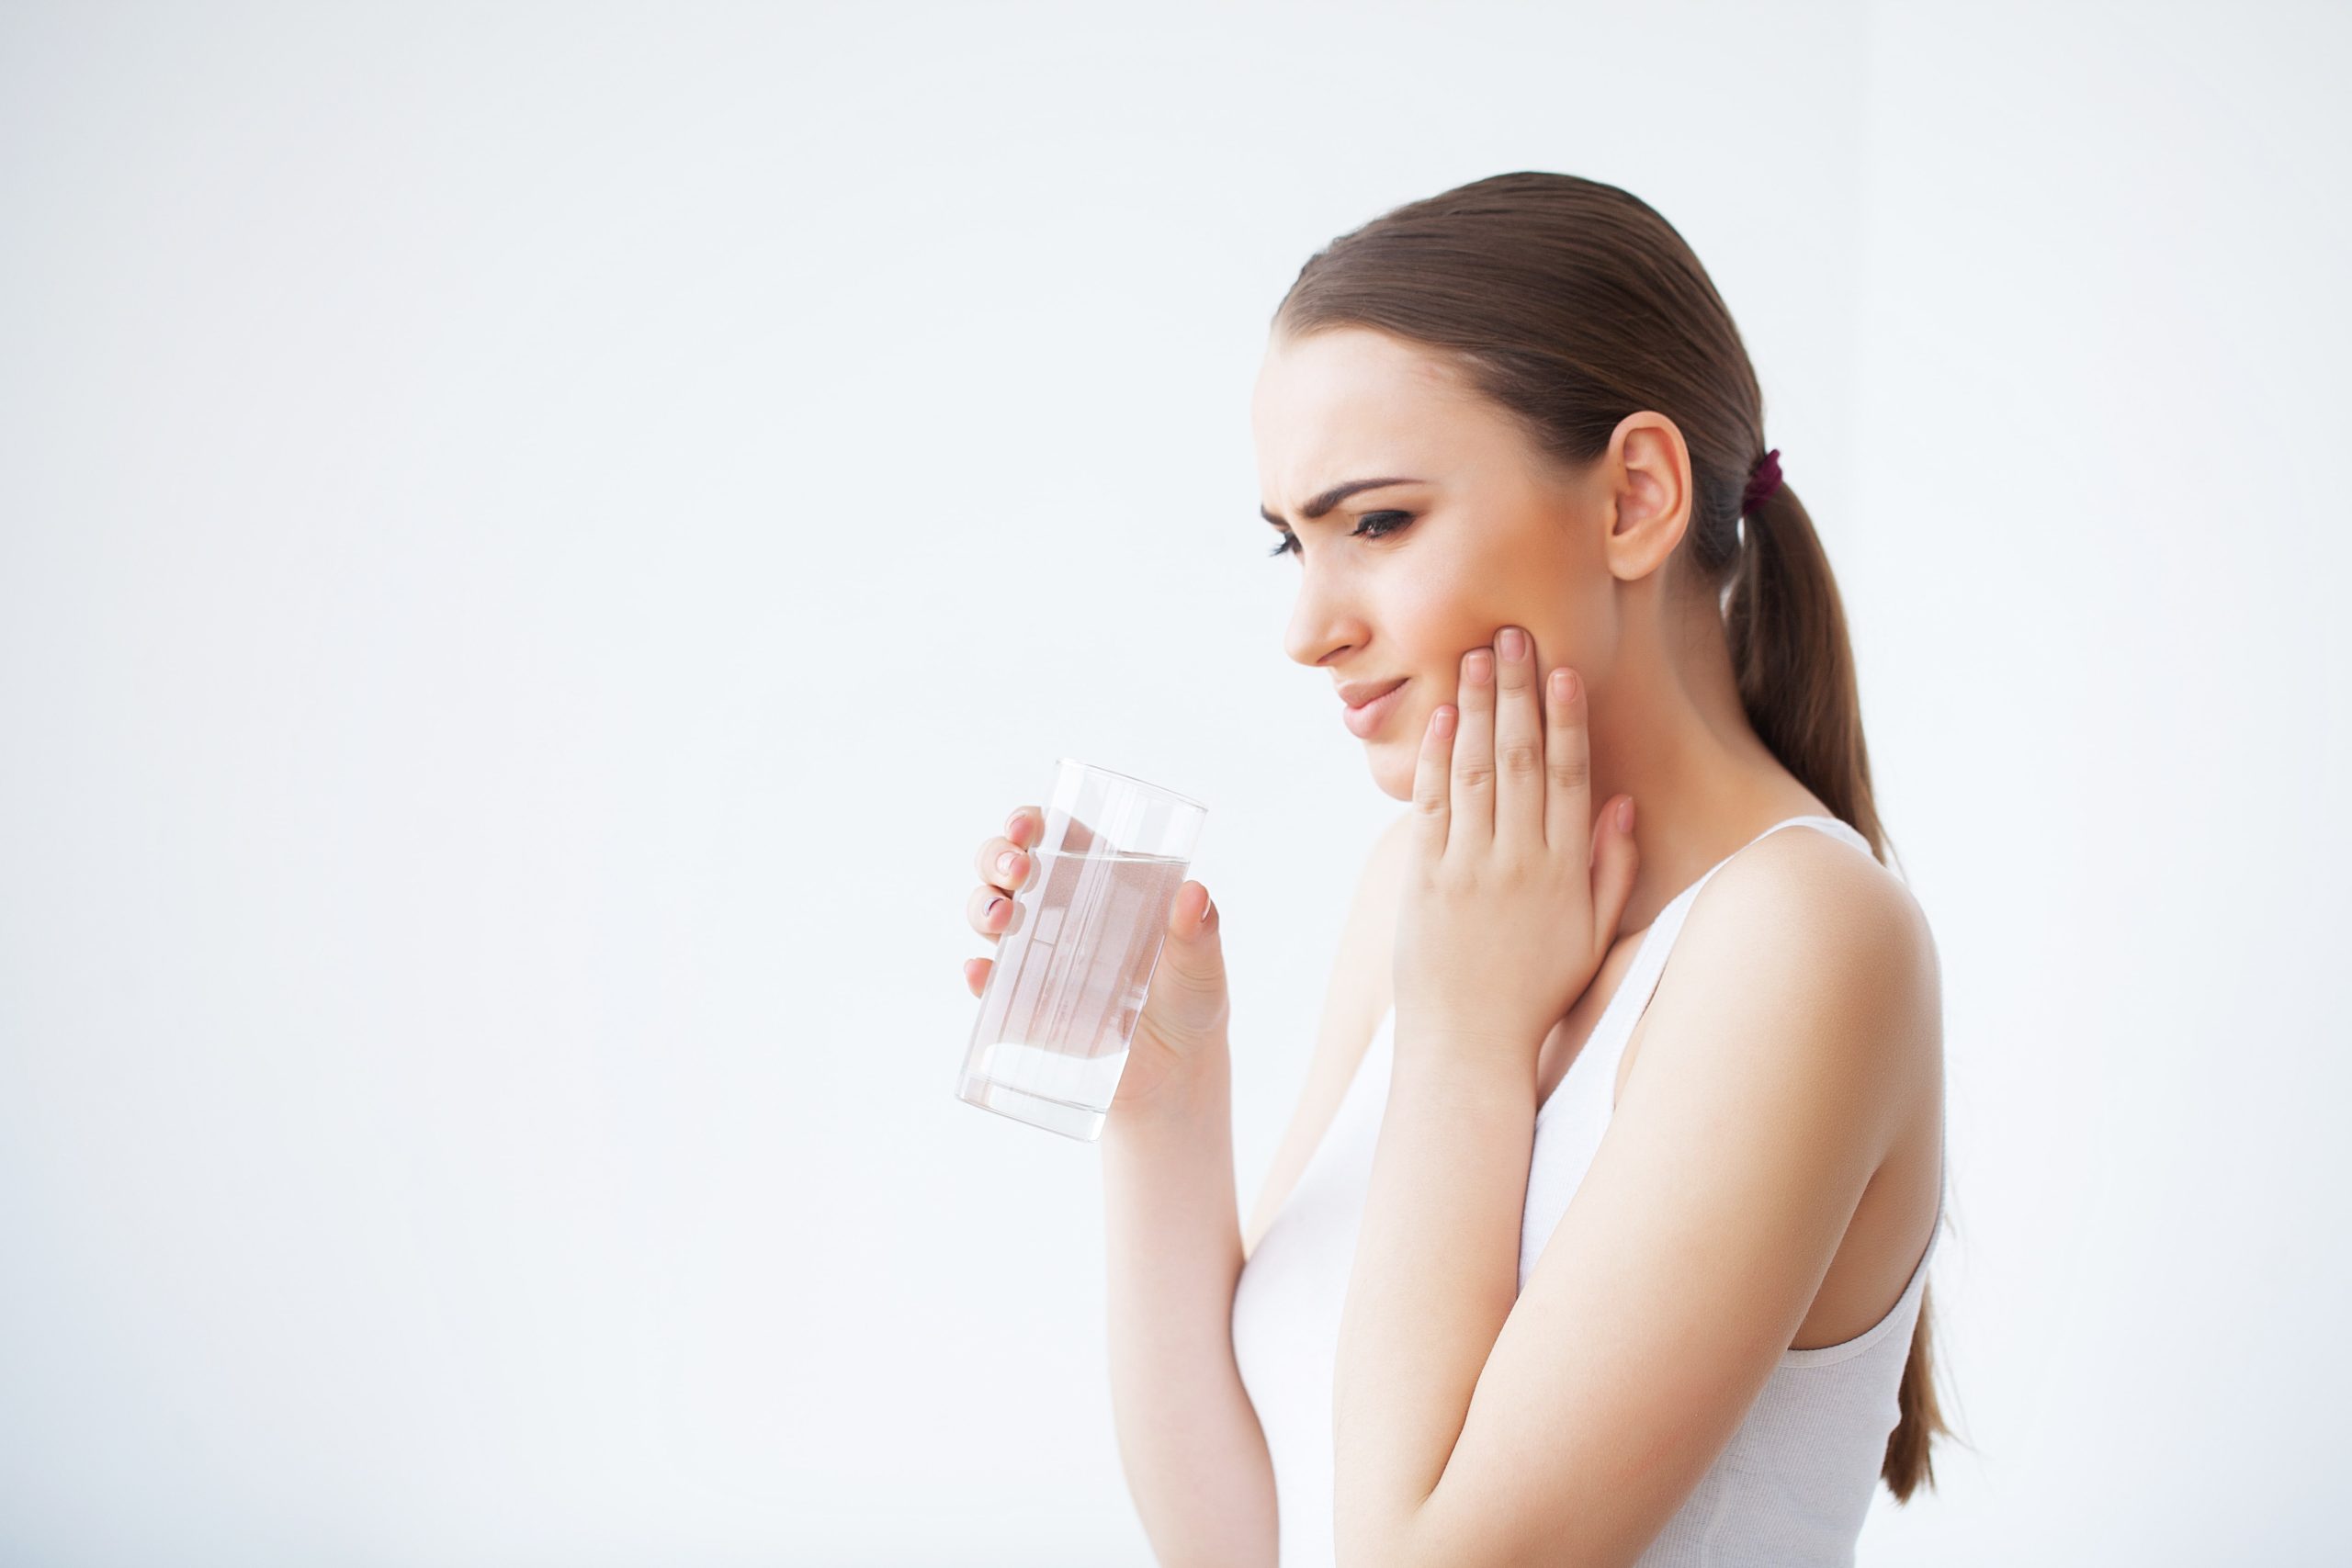 woman drinking a glass of water to deal with teeth pain